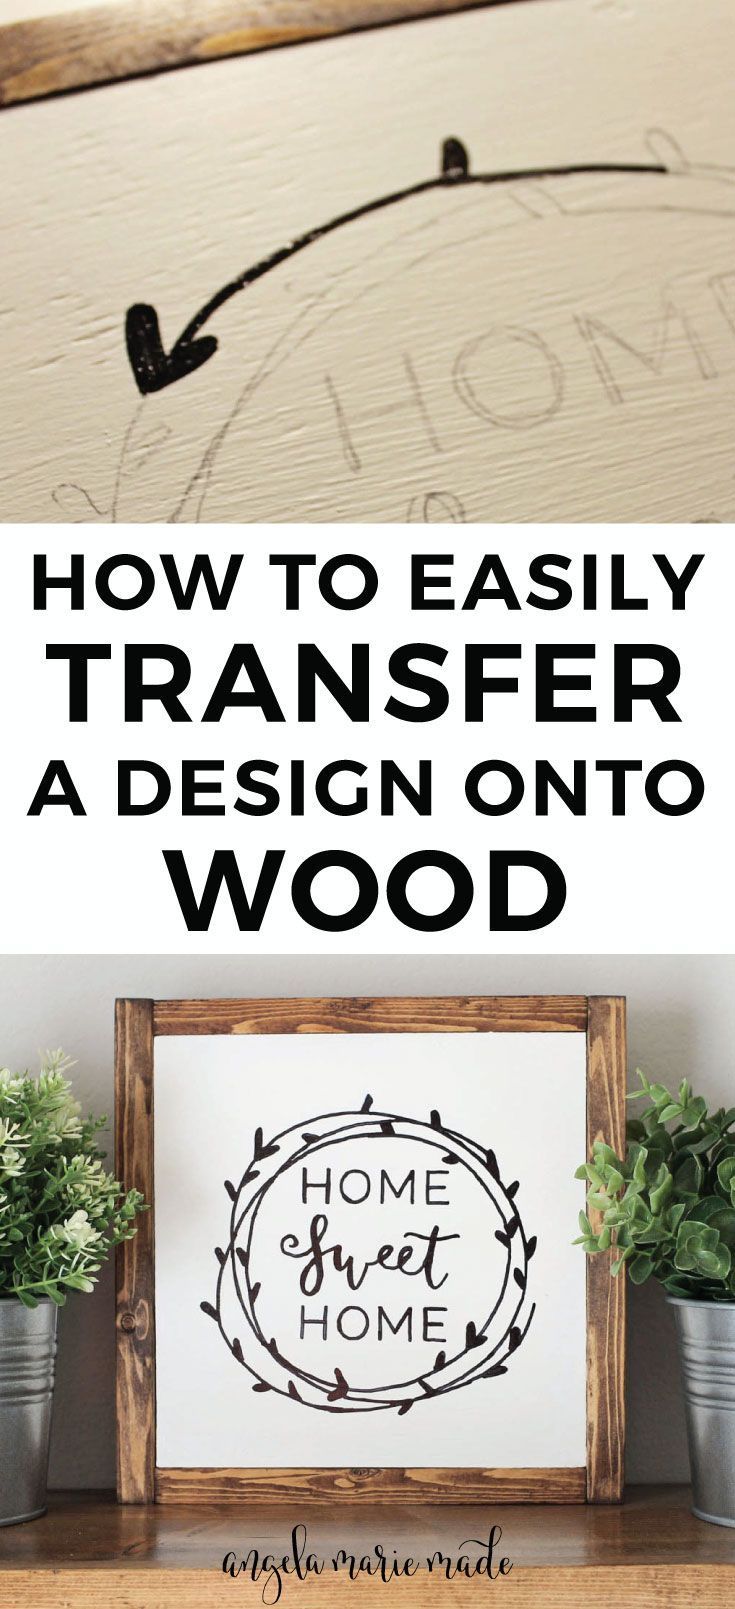 How to easily transfer a design onto wood -   15 wood decor signs
 ideas